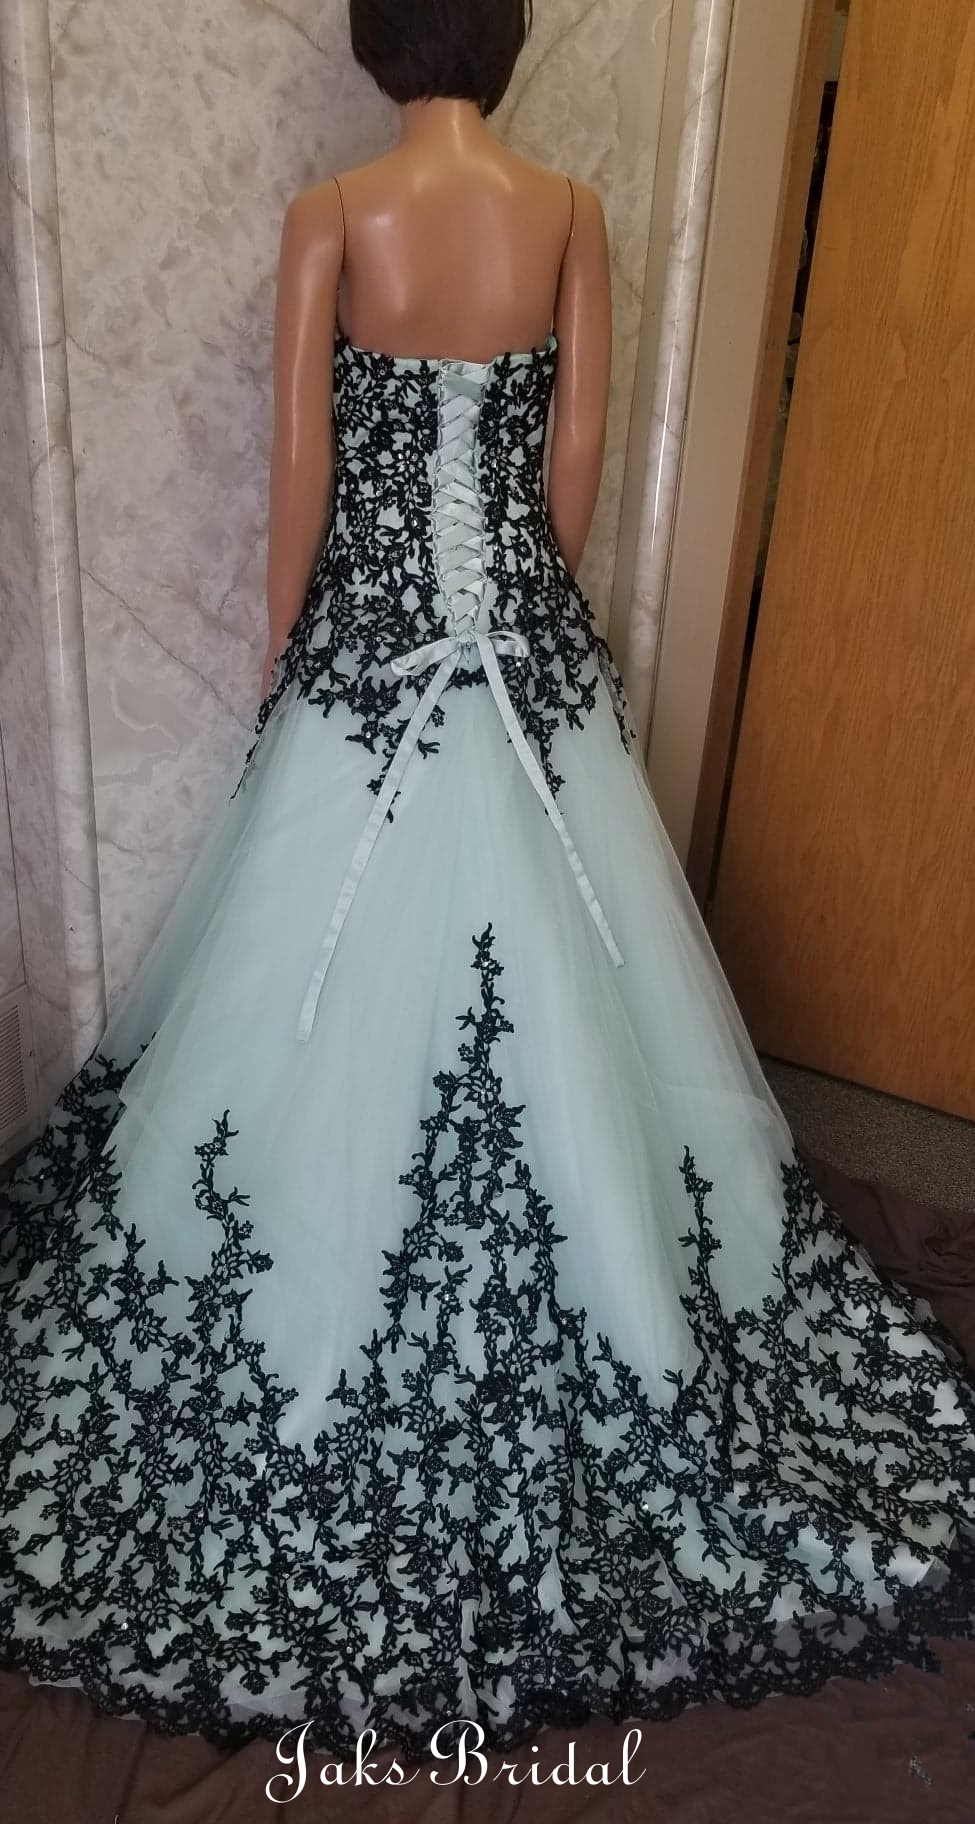 Mint and black lace ball gown